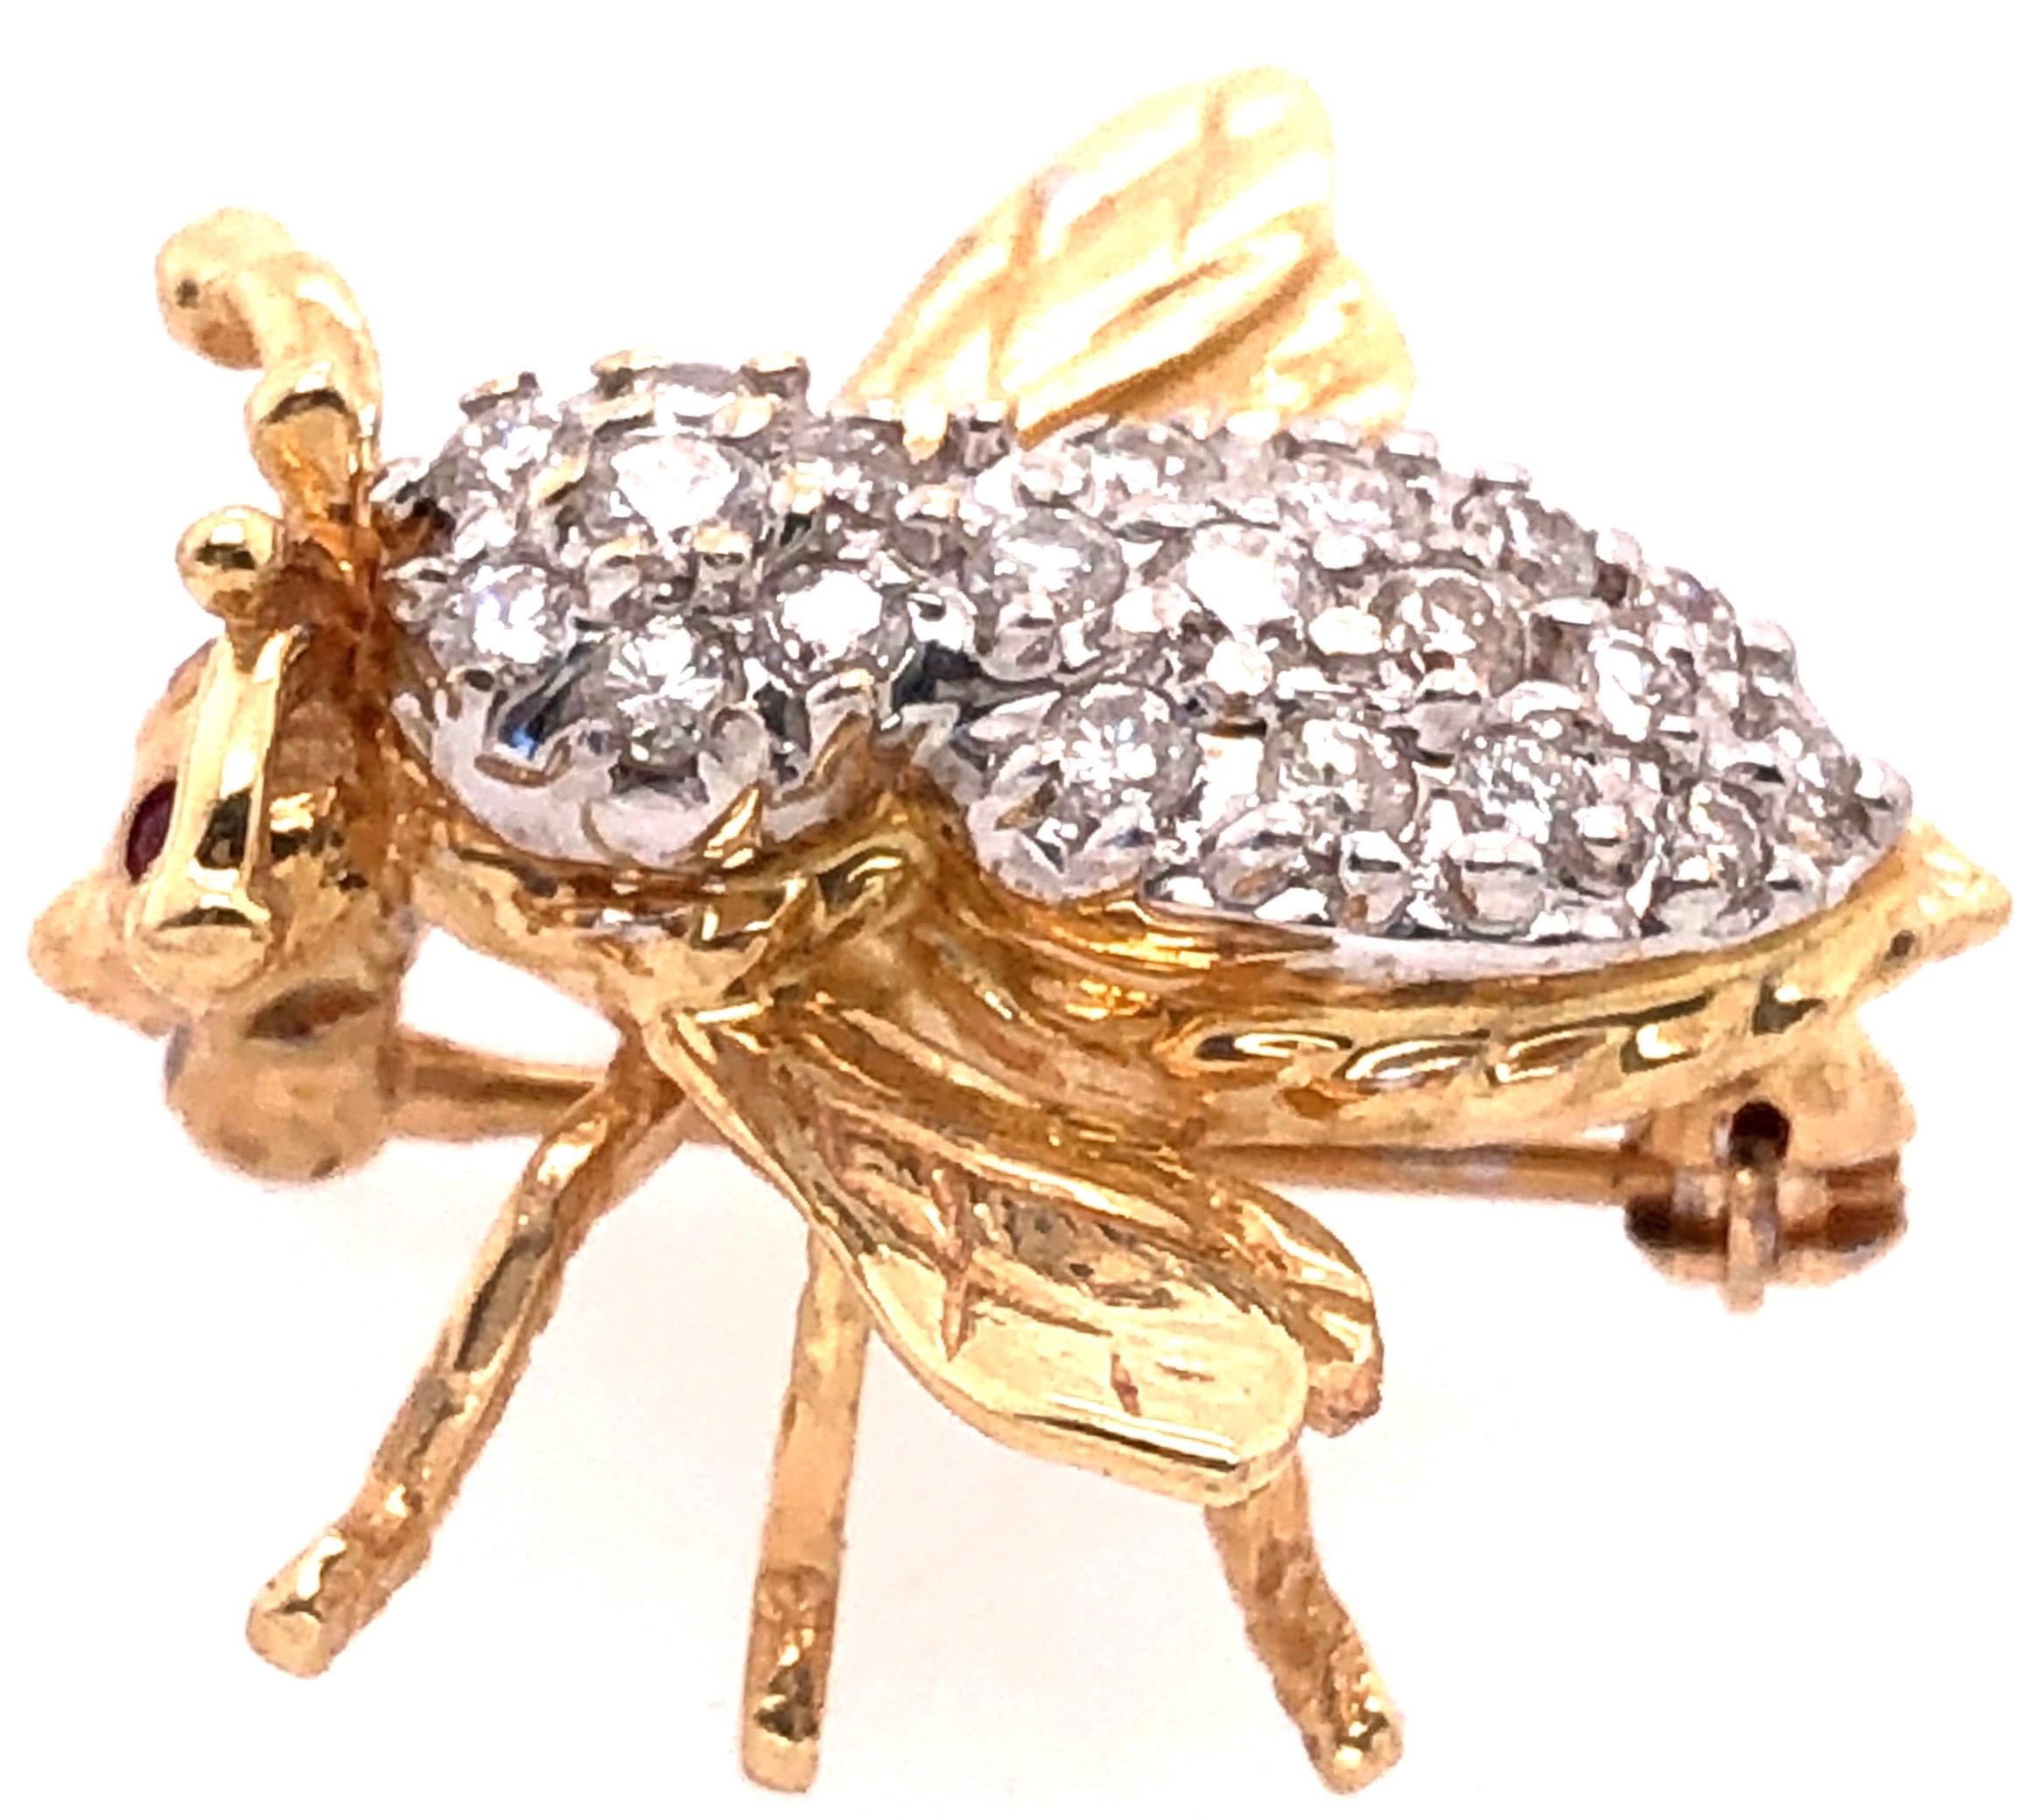 14 Karat Yellow And White Gold With Diamond Bee / Insect Brooch 
0.30 total diamond weight.
4.57 grams total weight.
